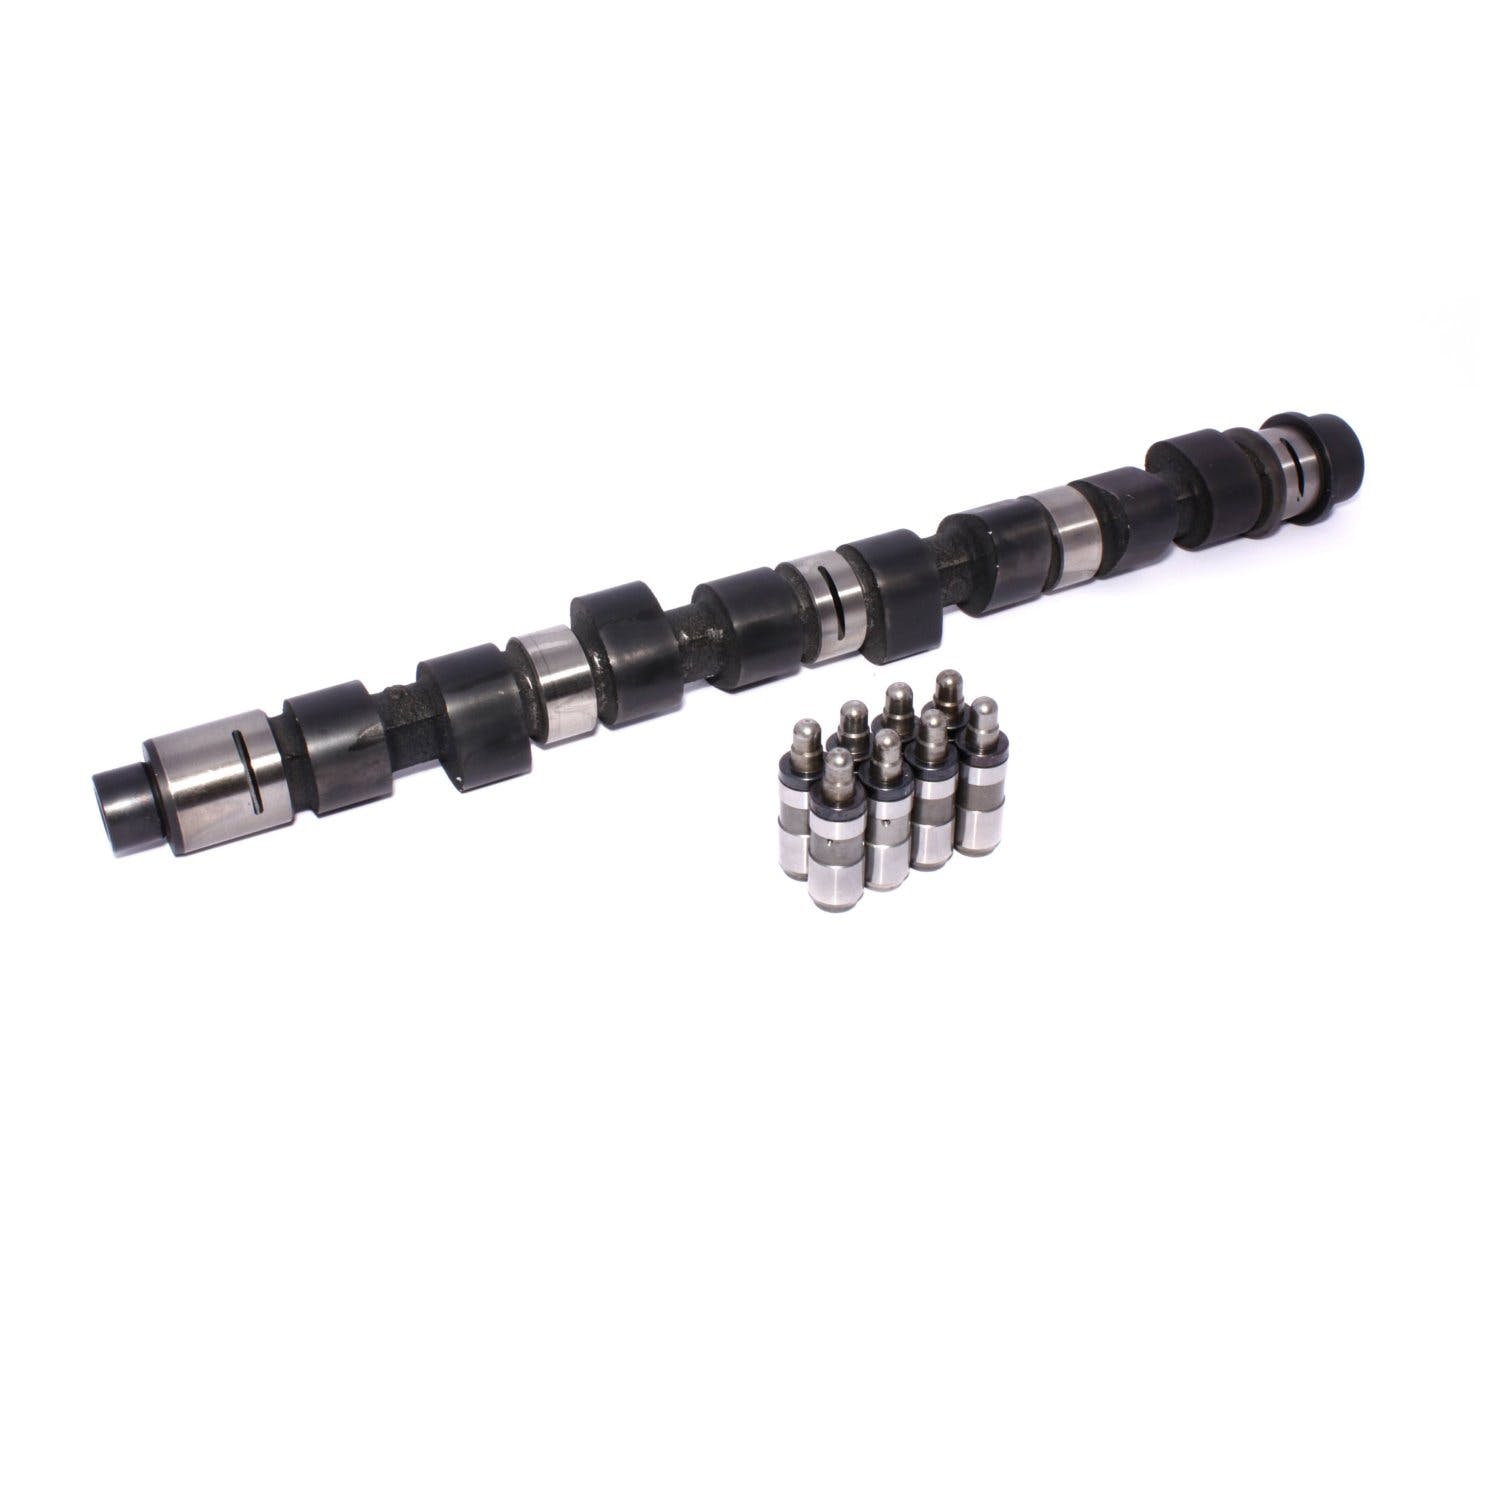 Competition Cams CL22-123-6 High Energy Camshaft/Lifter Kit